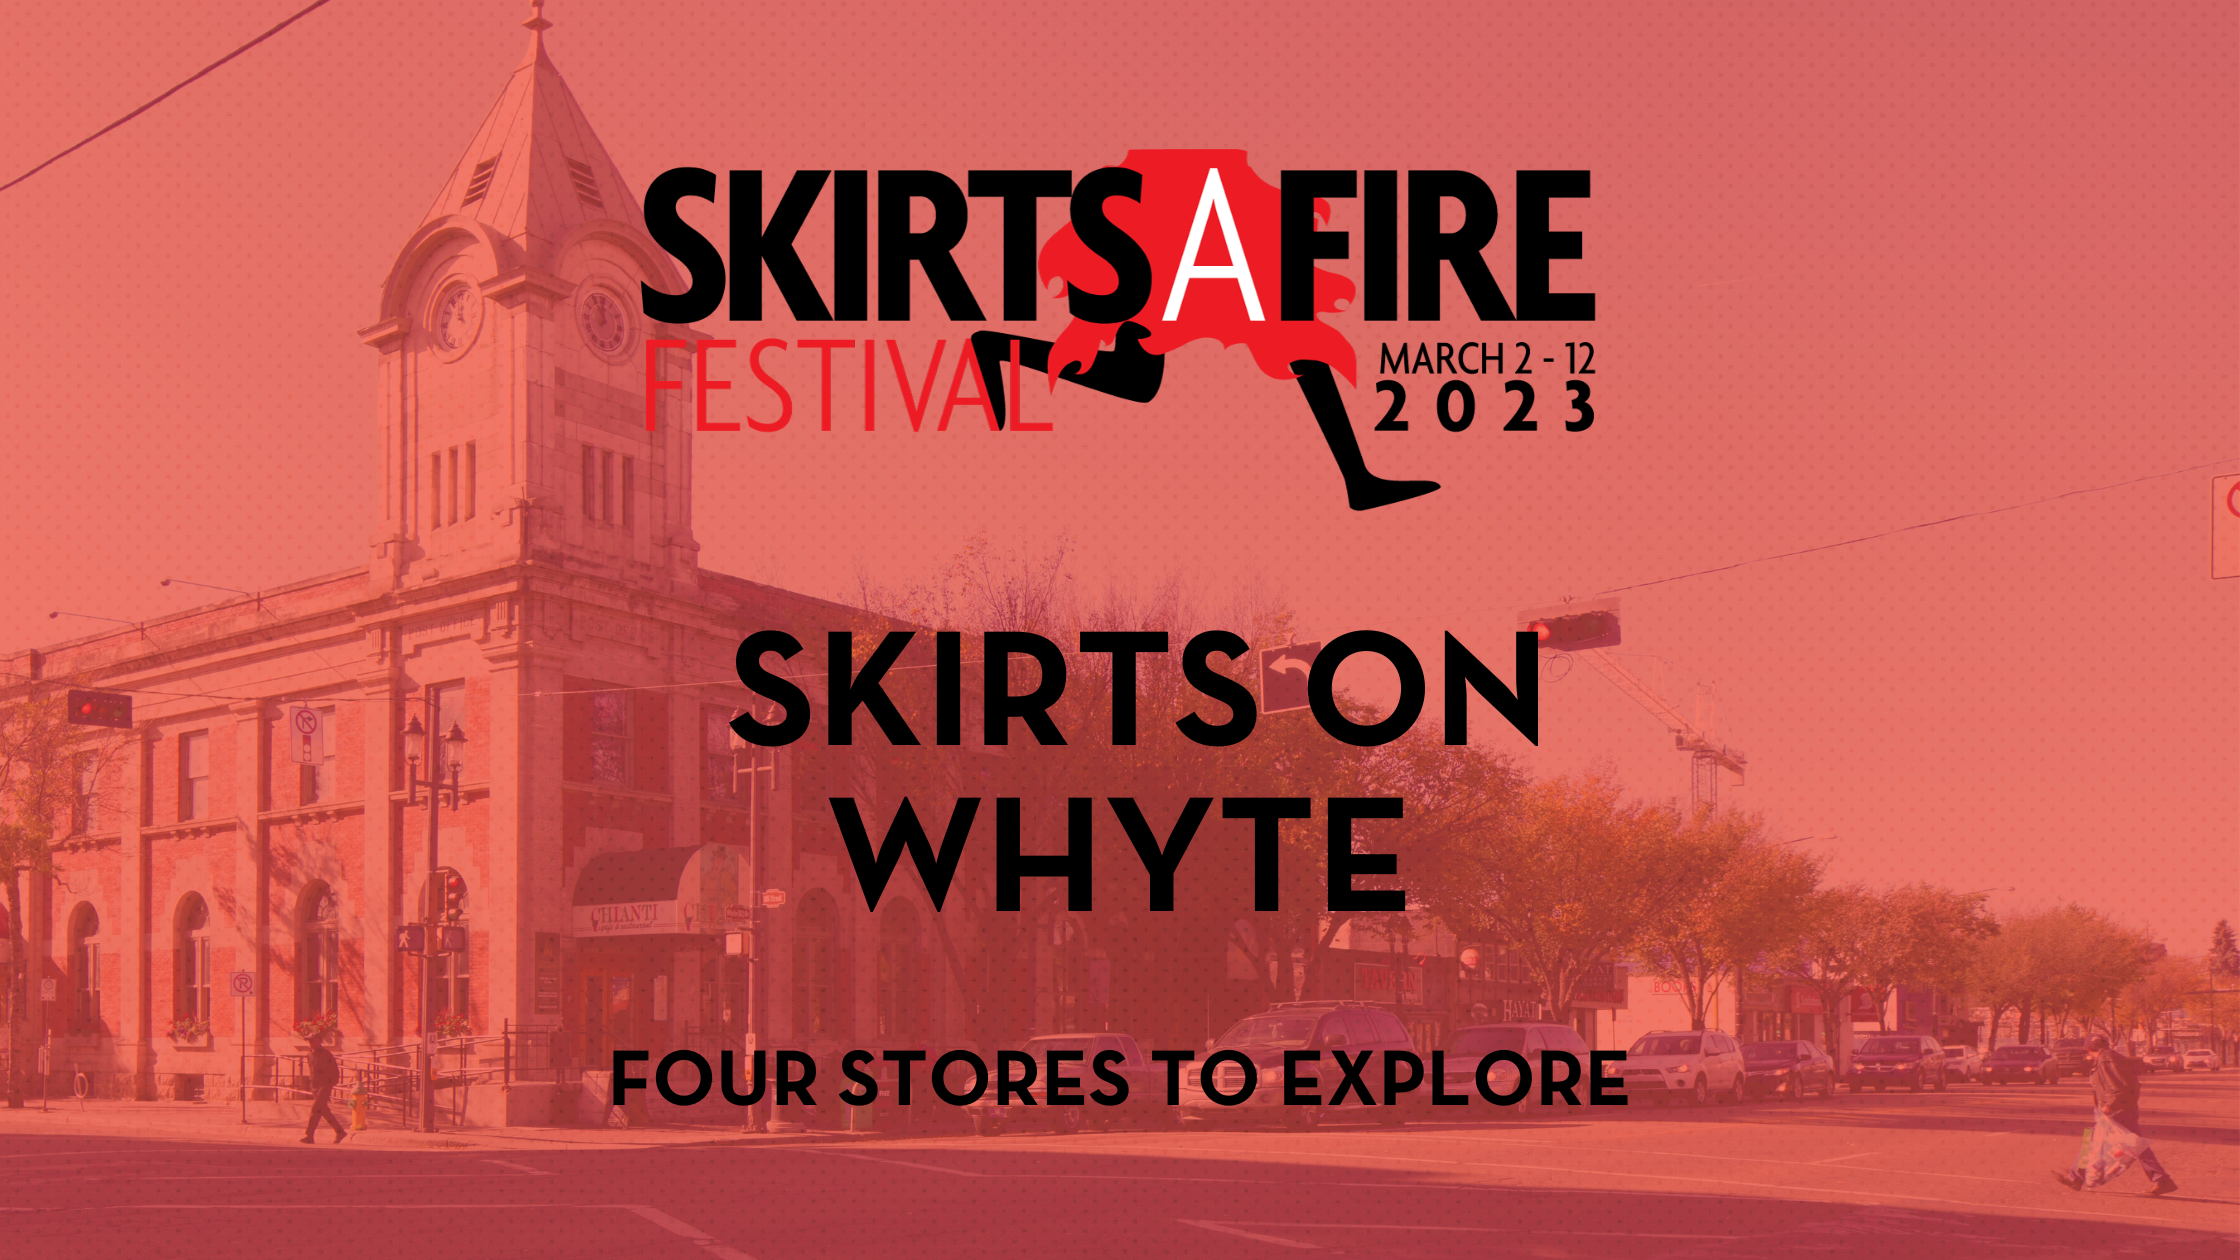 Skirts on Whyte festival logo, and text that there are "four stores to explore" over a photo of Whyte Avenue with a red colourized overlay